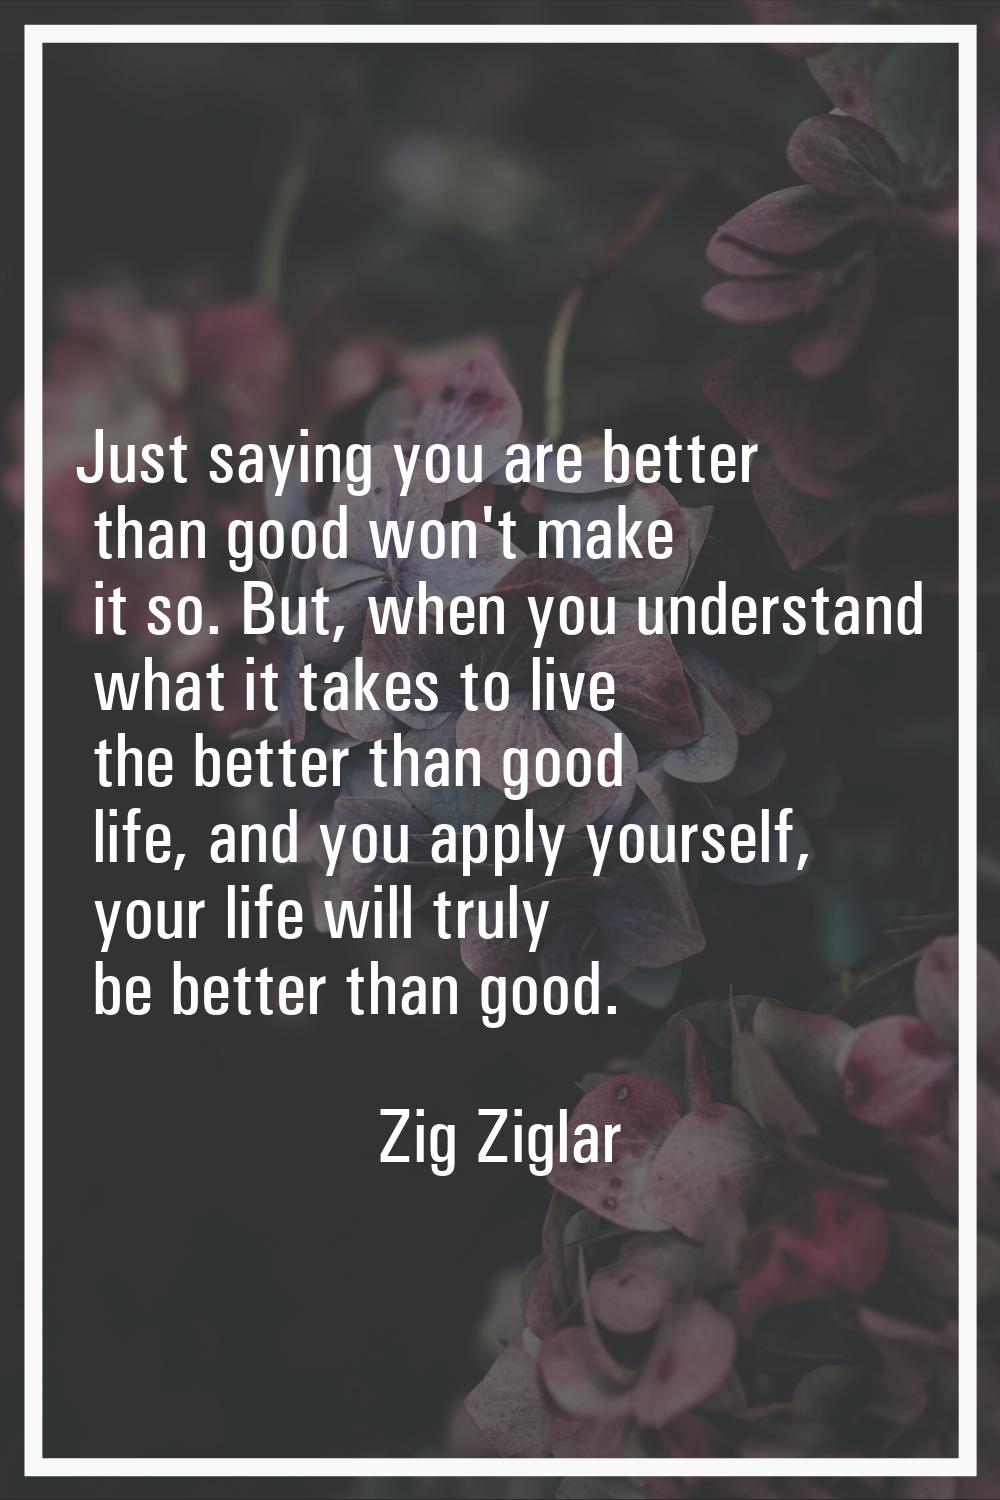 Just saying you are better than good won't make it so. But, when you understand what it takes to li